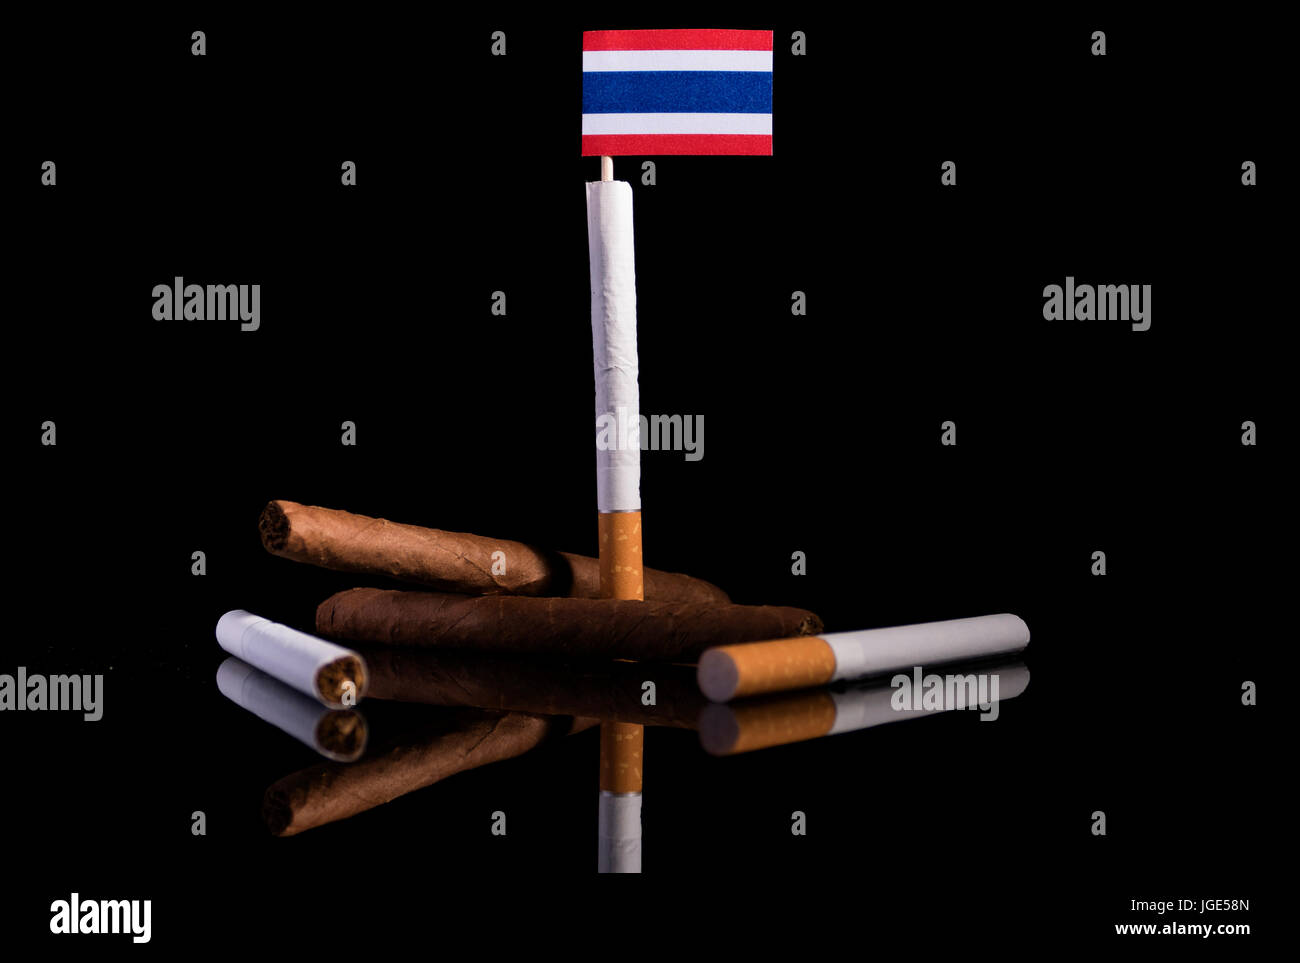 Thai flag with cigarettes and cigars. Tobacco Industry concept. Stock Photo